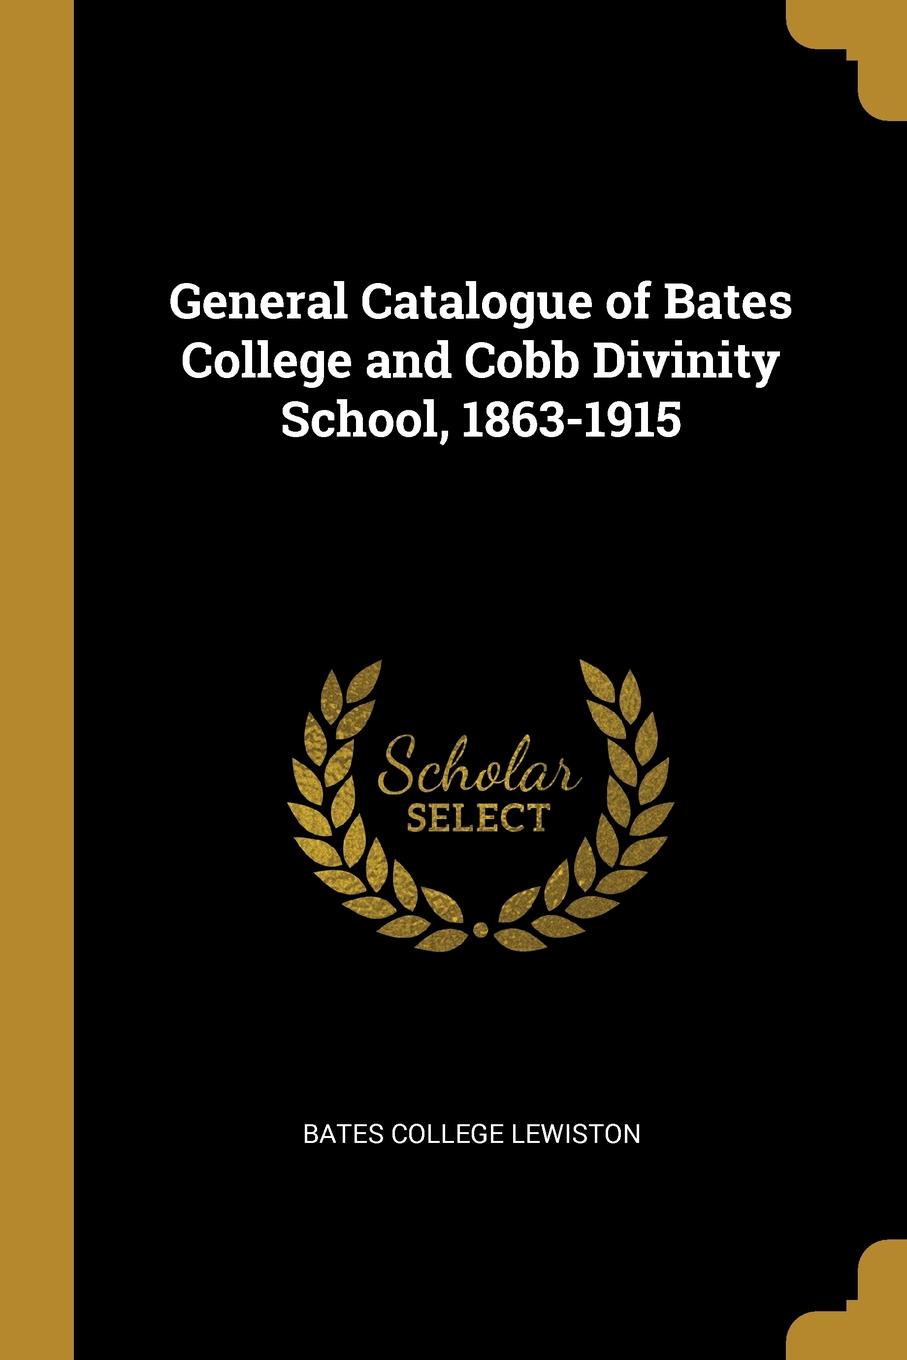 General Catalogue of Bates College and Cobb Divinity School, 1863-1915